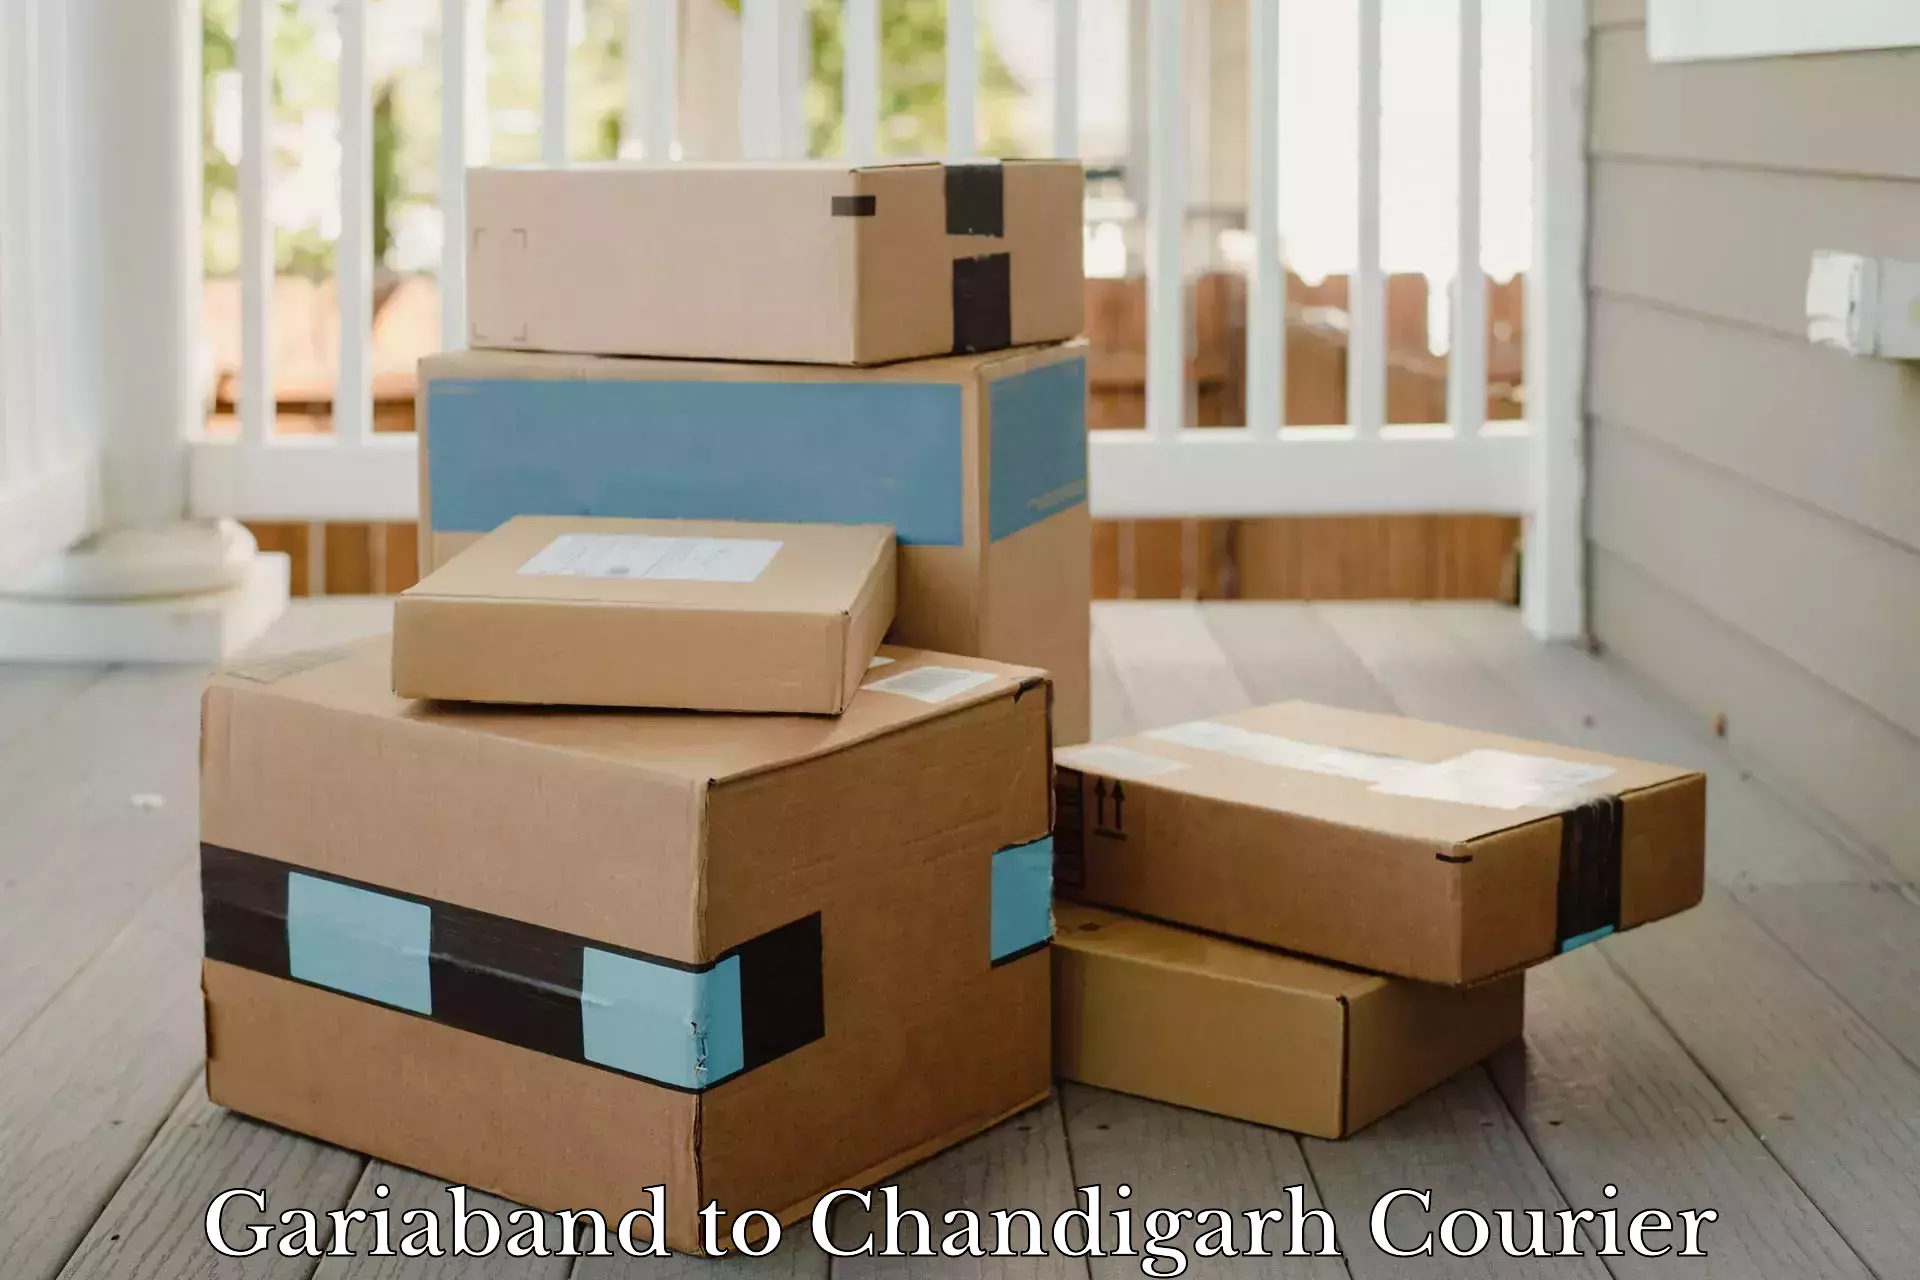 Delivery service partnership Gariaband to Chandigarh